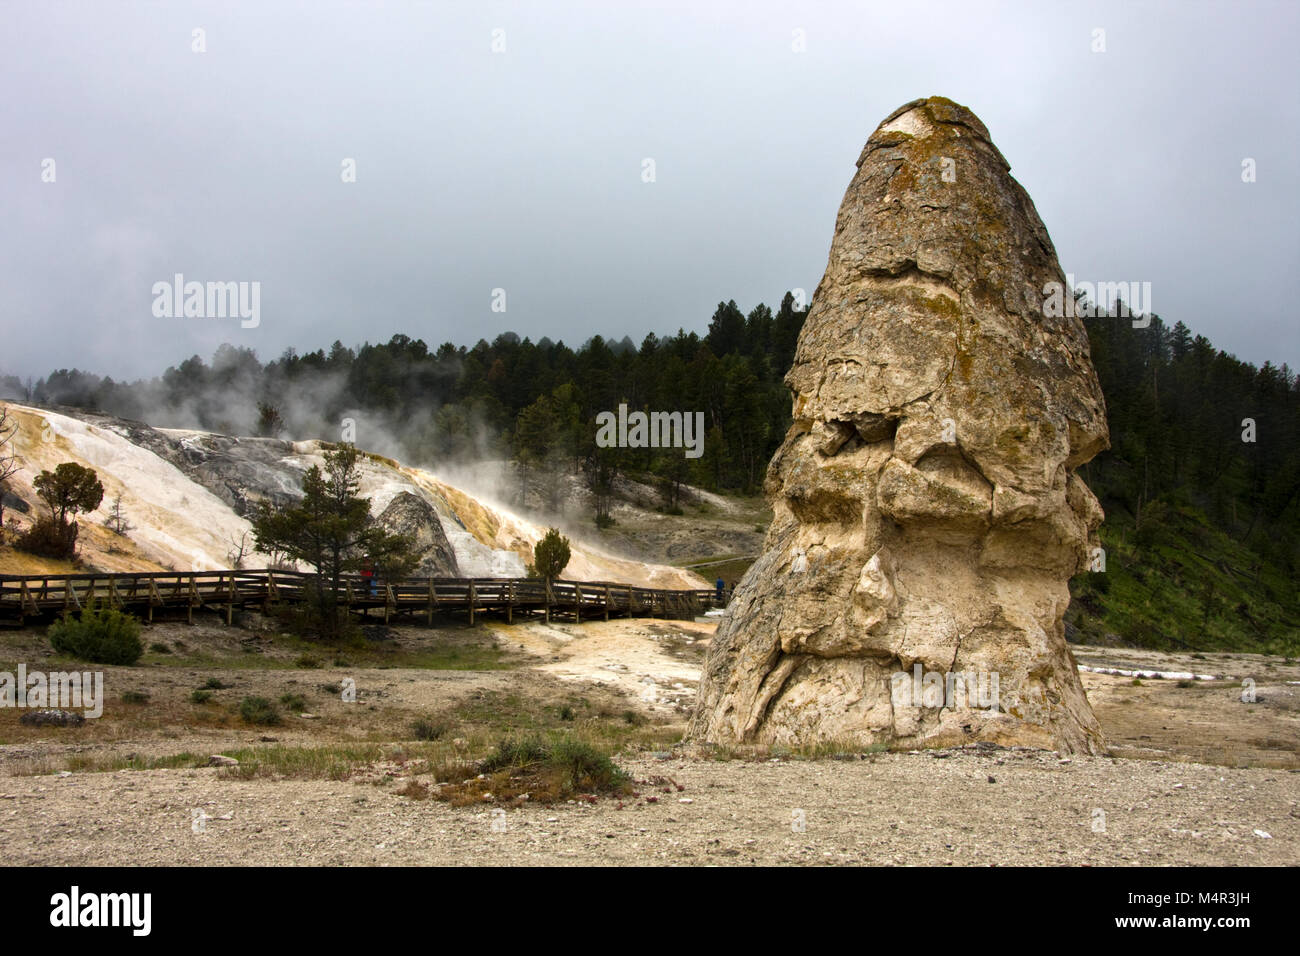 Liberty Cap and Palette Spring, Yellowstone National Park, USA Stock Photo